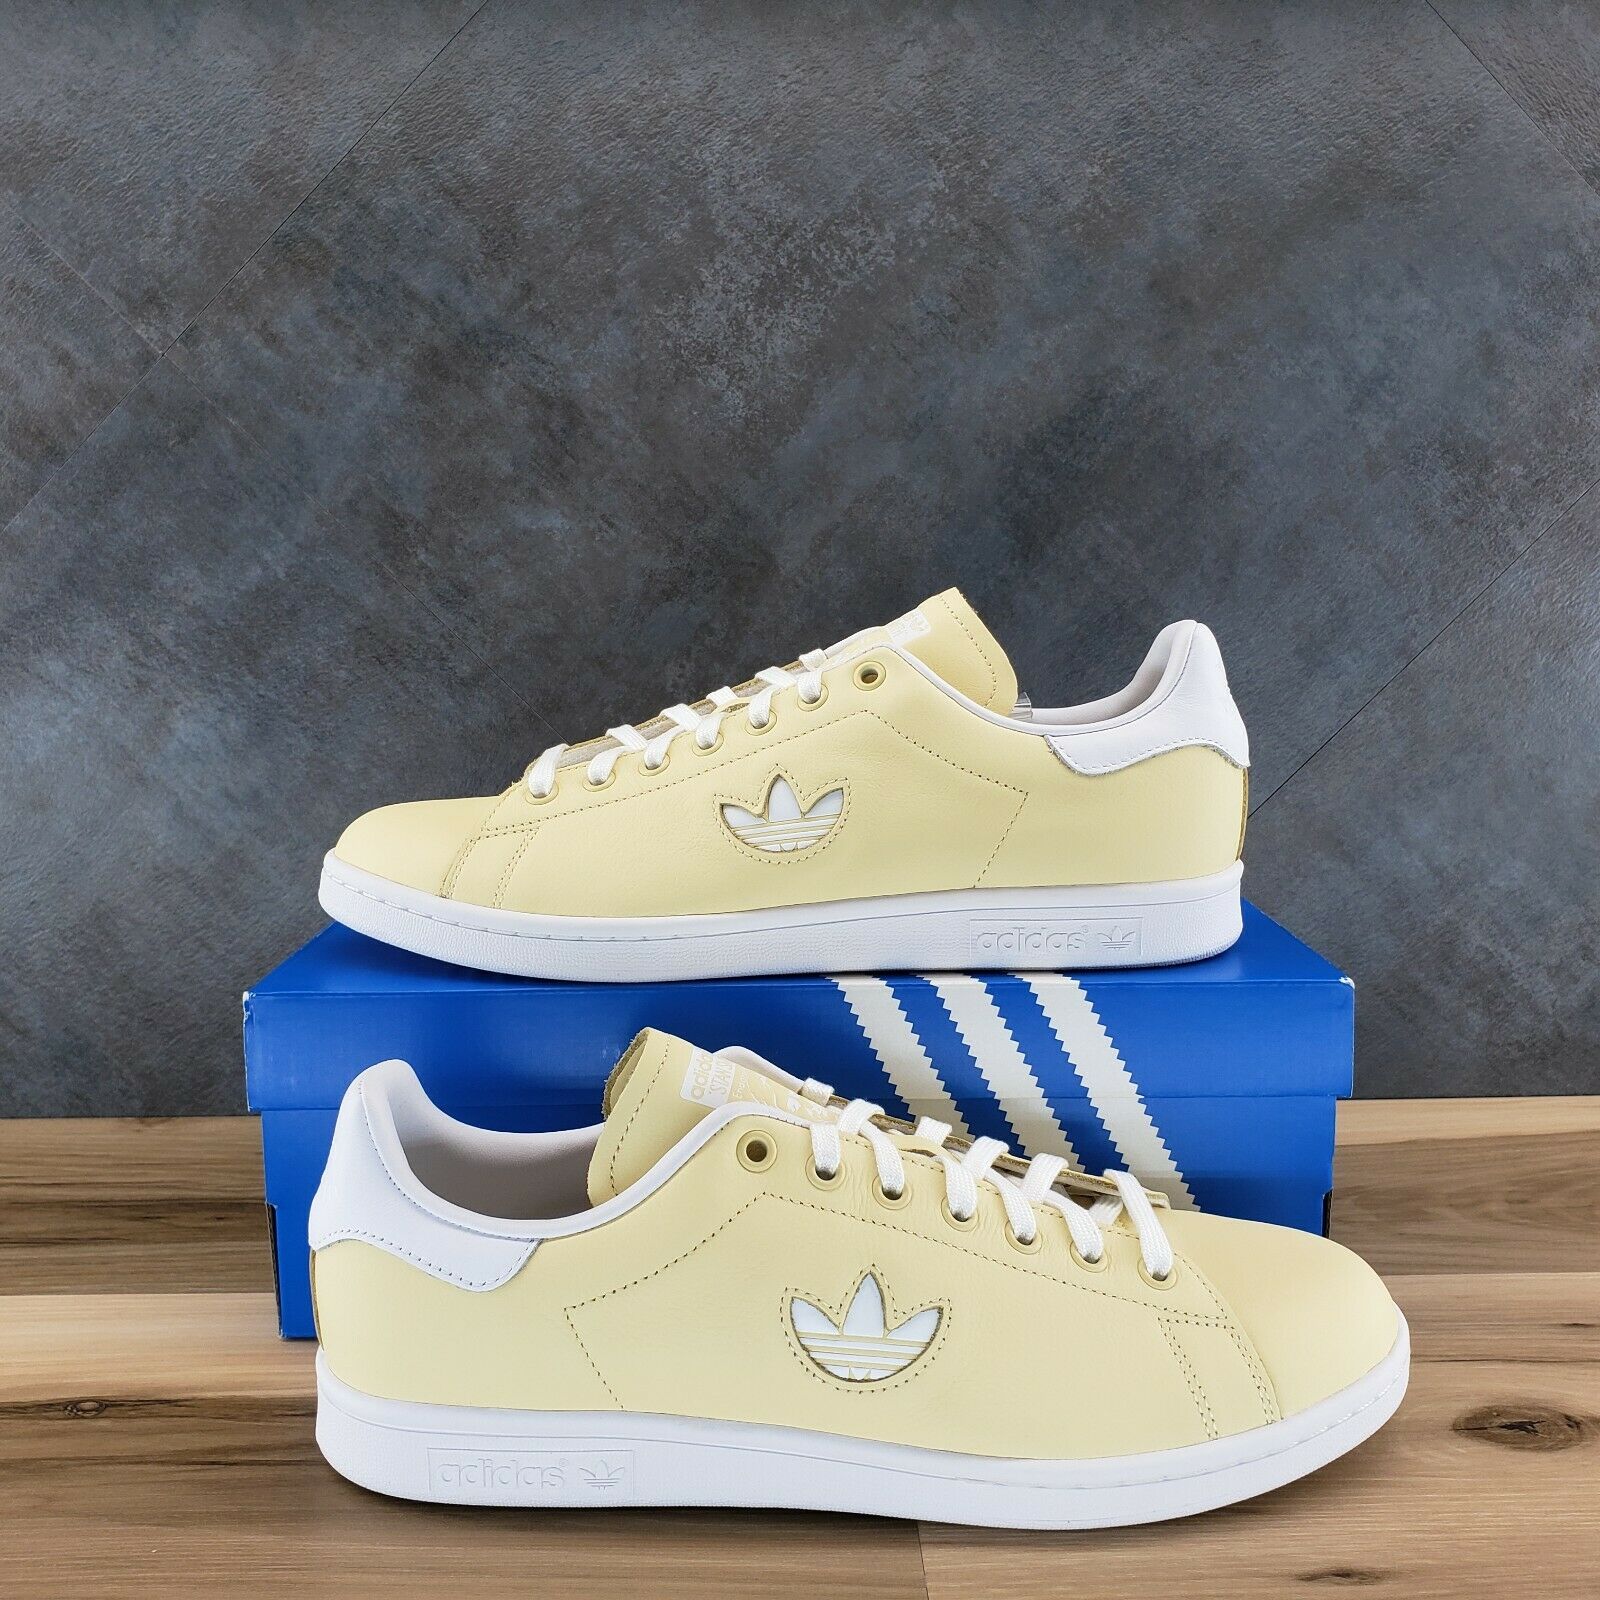 Adidas Originals Stan Smith 'Easy Yellow' Shoes/Sneakers - Mens Size 10 (BD7438)